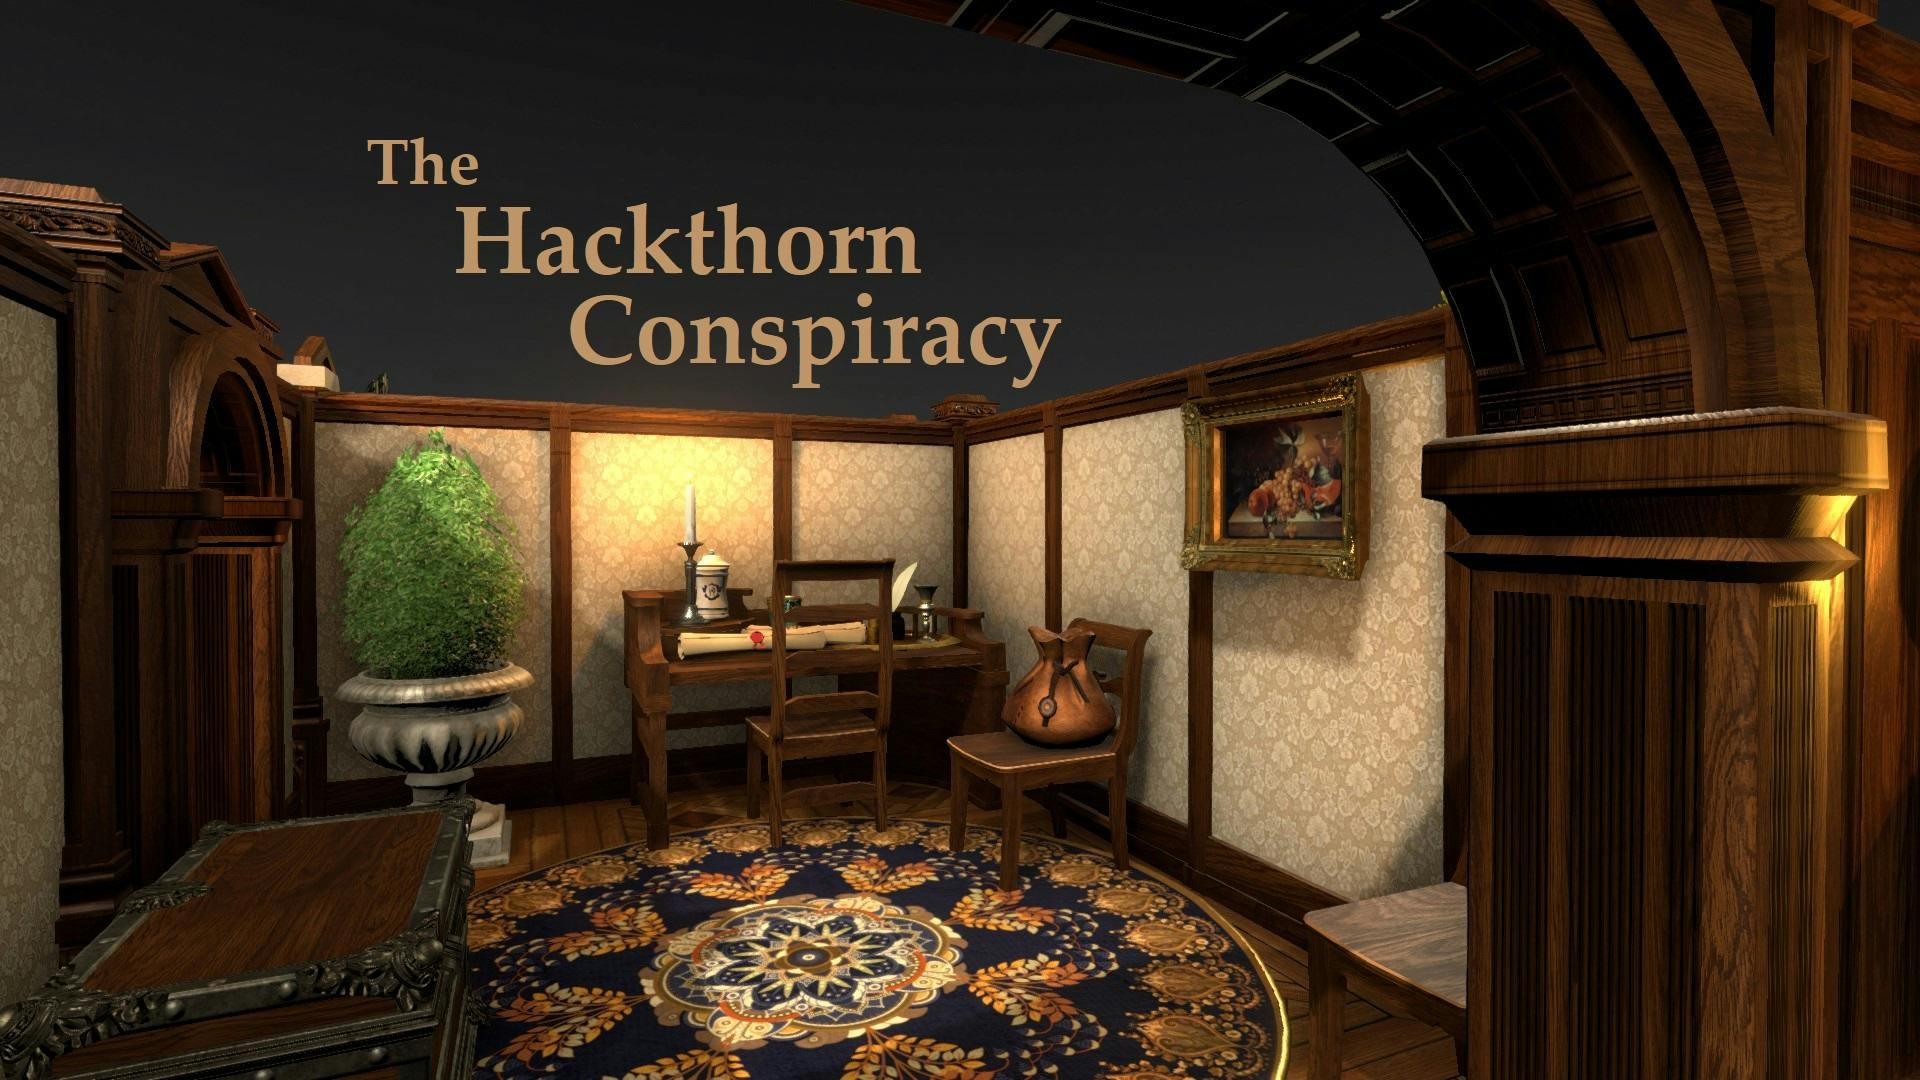 Political intrigue, perilous side-quests, and an open world to explore! Join The Hackthorn Conspiracy